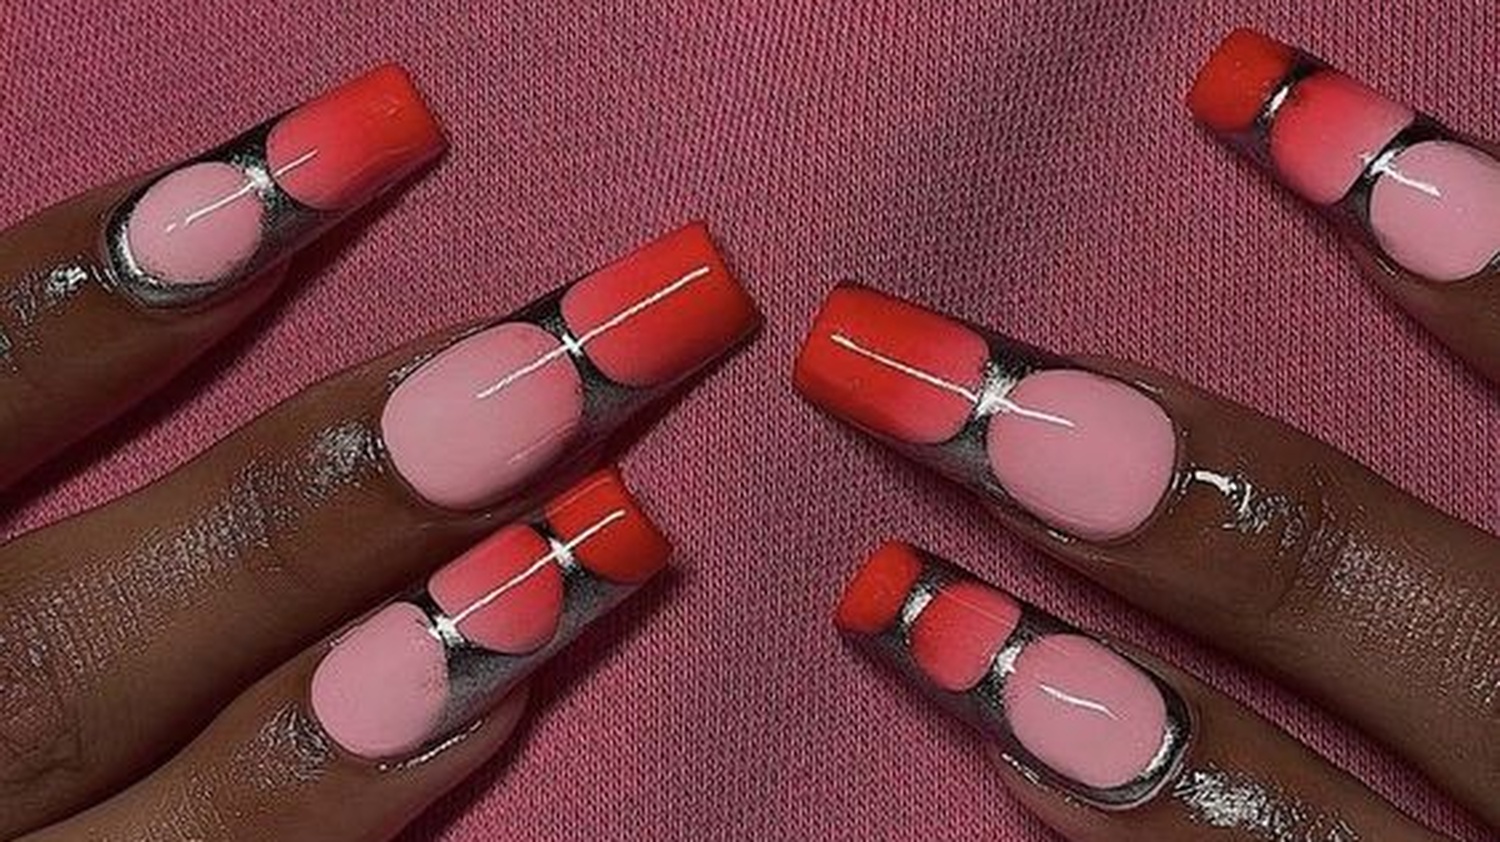 Bring In The Season Of Love With These Valentine’s Day Nails